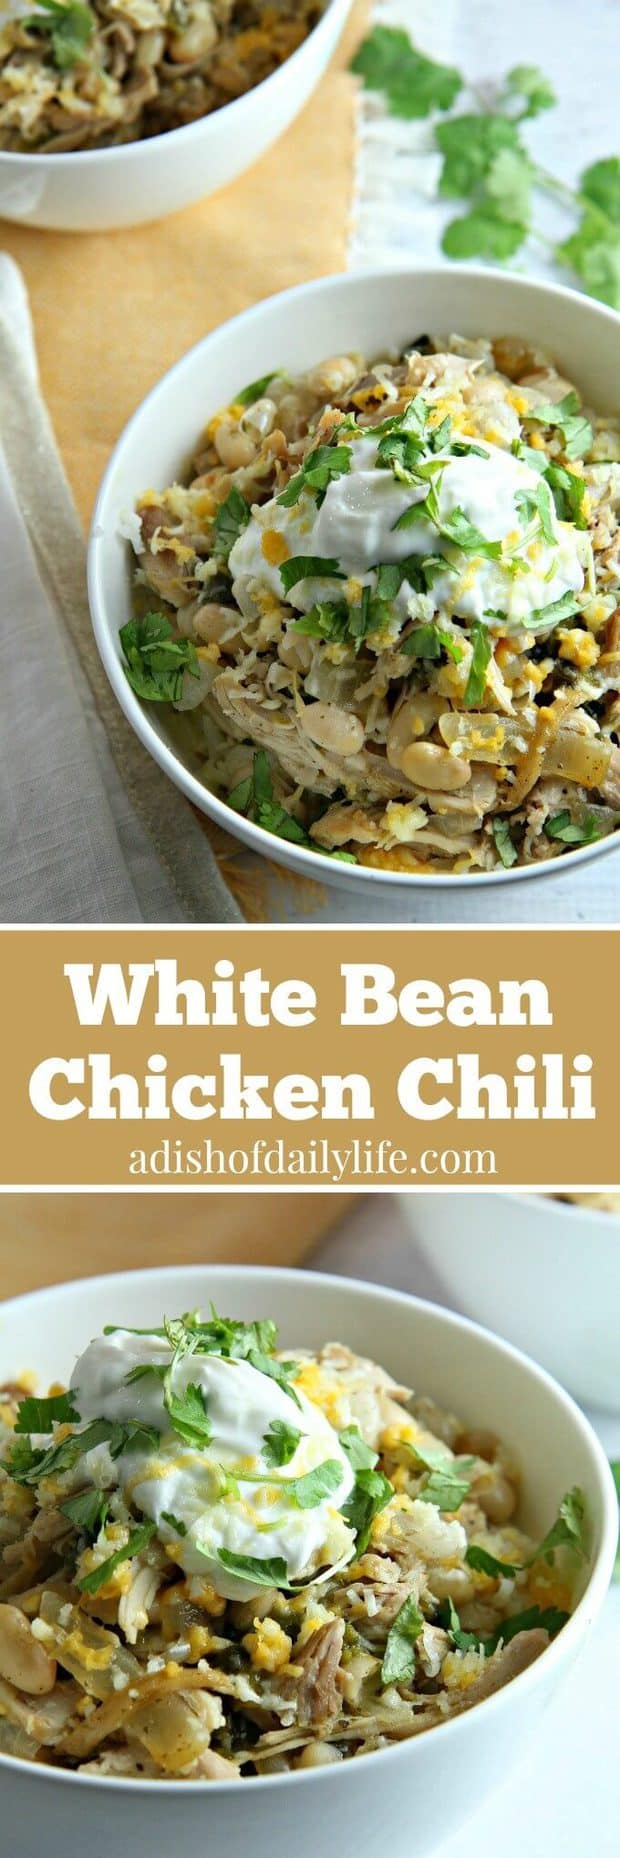 White Bean Chicken Chili is a healthy and delicious easy weeknight meal, but it’s also perfect for game day. Guaranteed to be a hit with kids and adults alike!